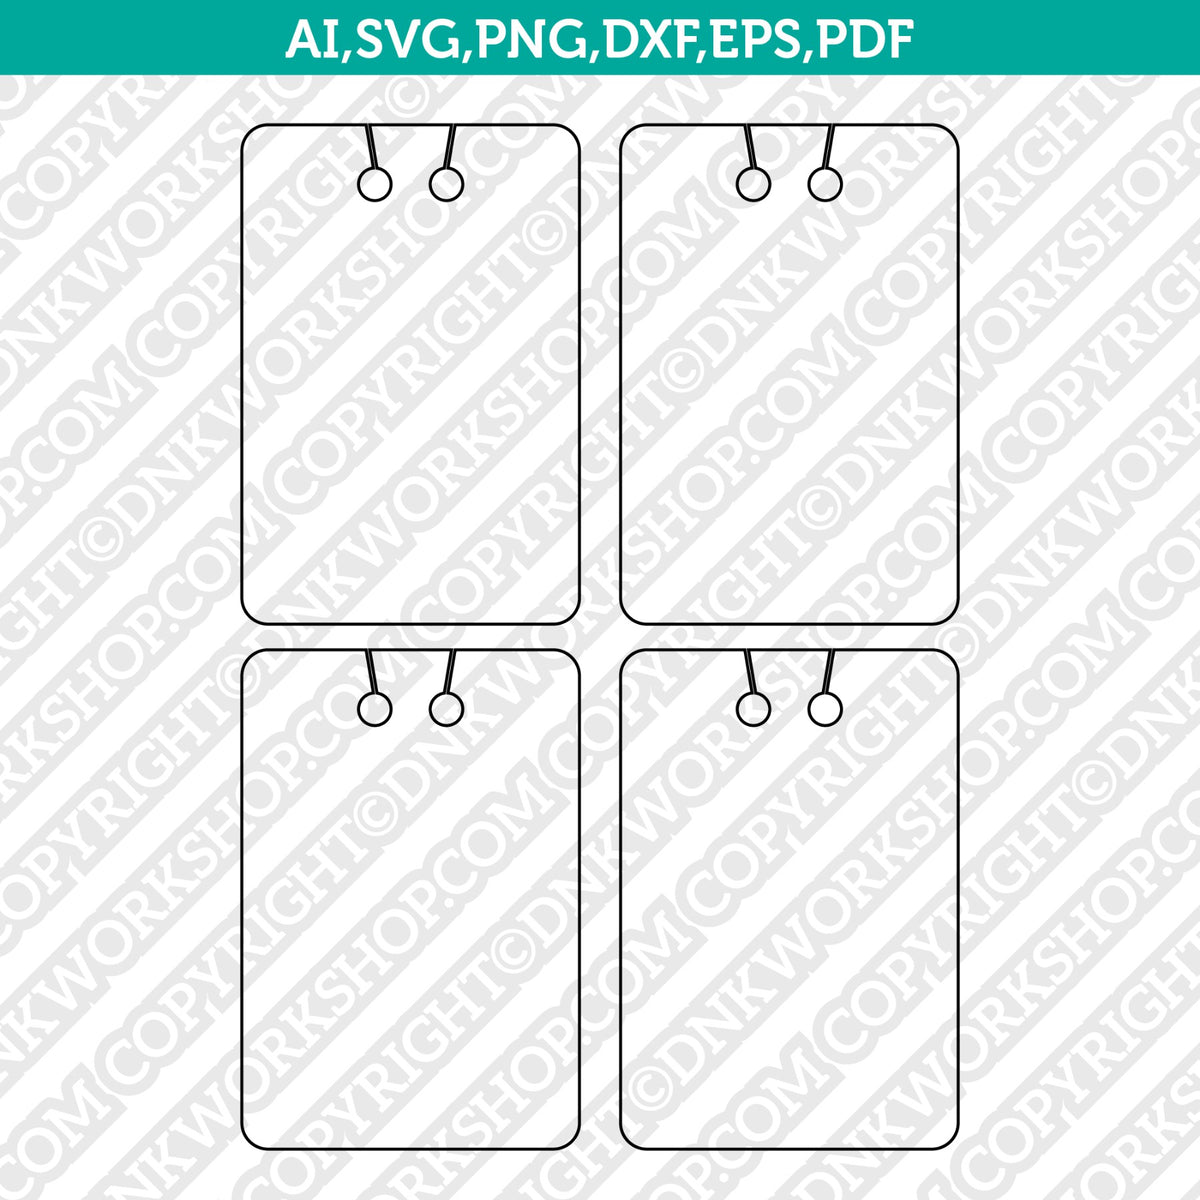 Keyring Display Card Svg, Keyring Display Card Template, Keychain  Packaging, Key Ring Tag Svg, Keychain Svg, Packaging Svg -  Norway